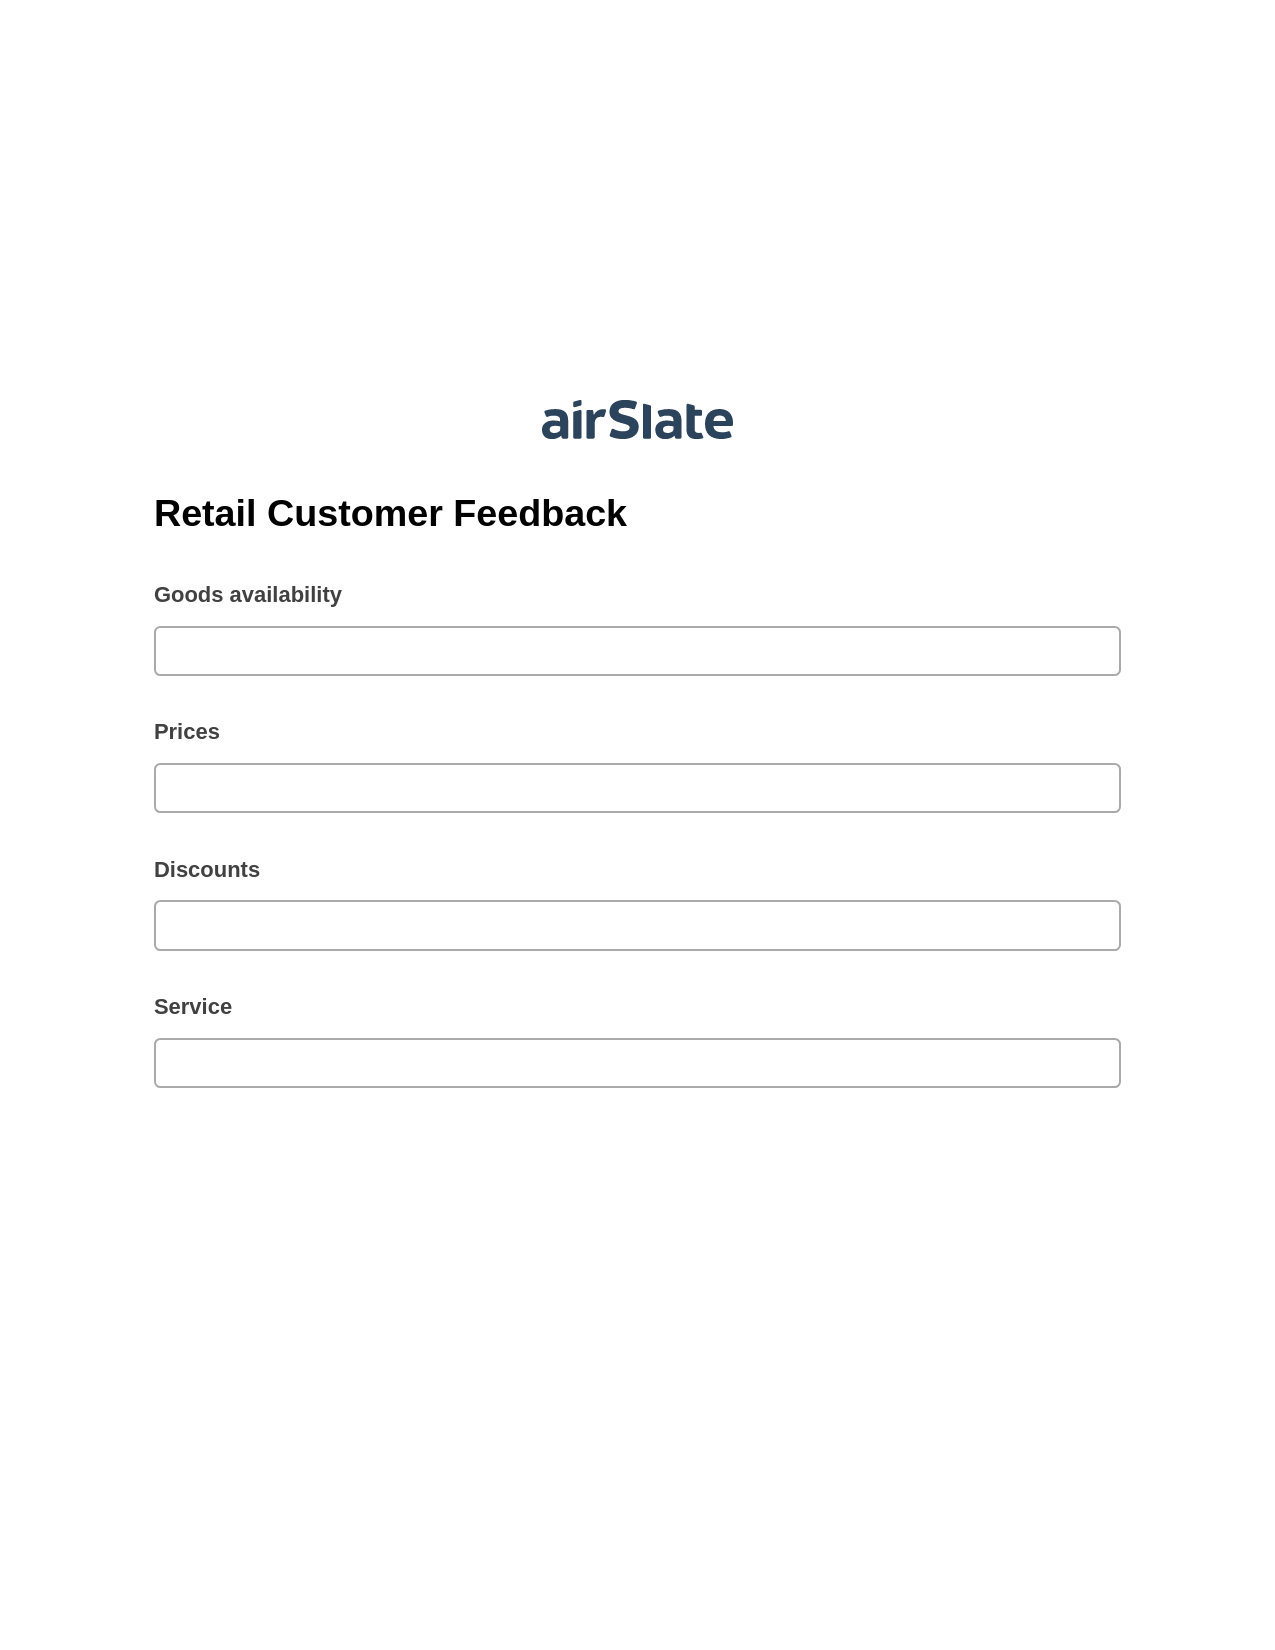 Retail Customer Feedback Pre-fill from Excel Spreadsheet Bot, Remove Tags From Slate Bot, Archive to SharePoint Folder Bot